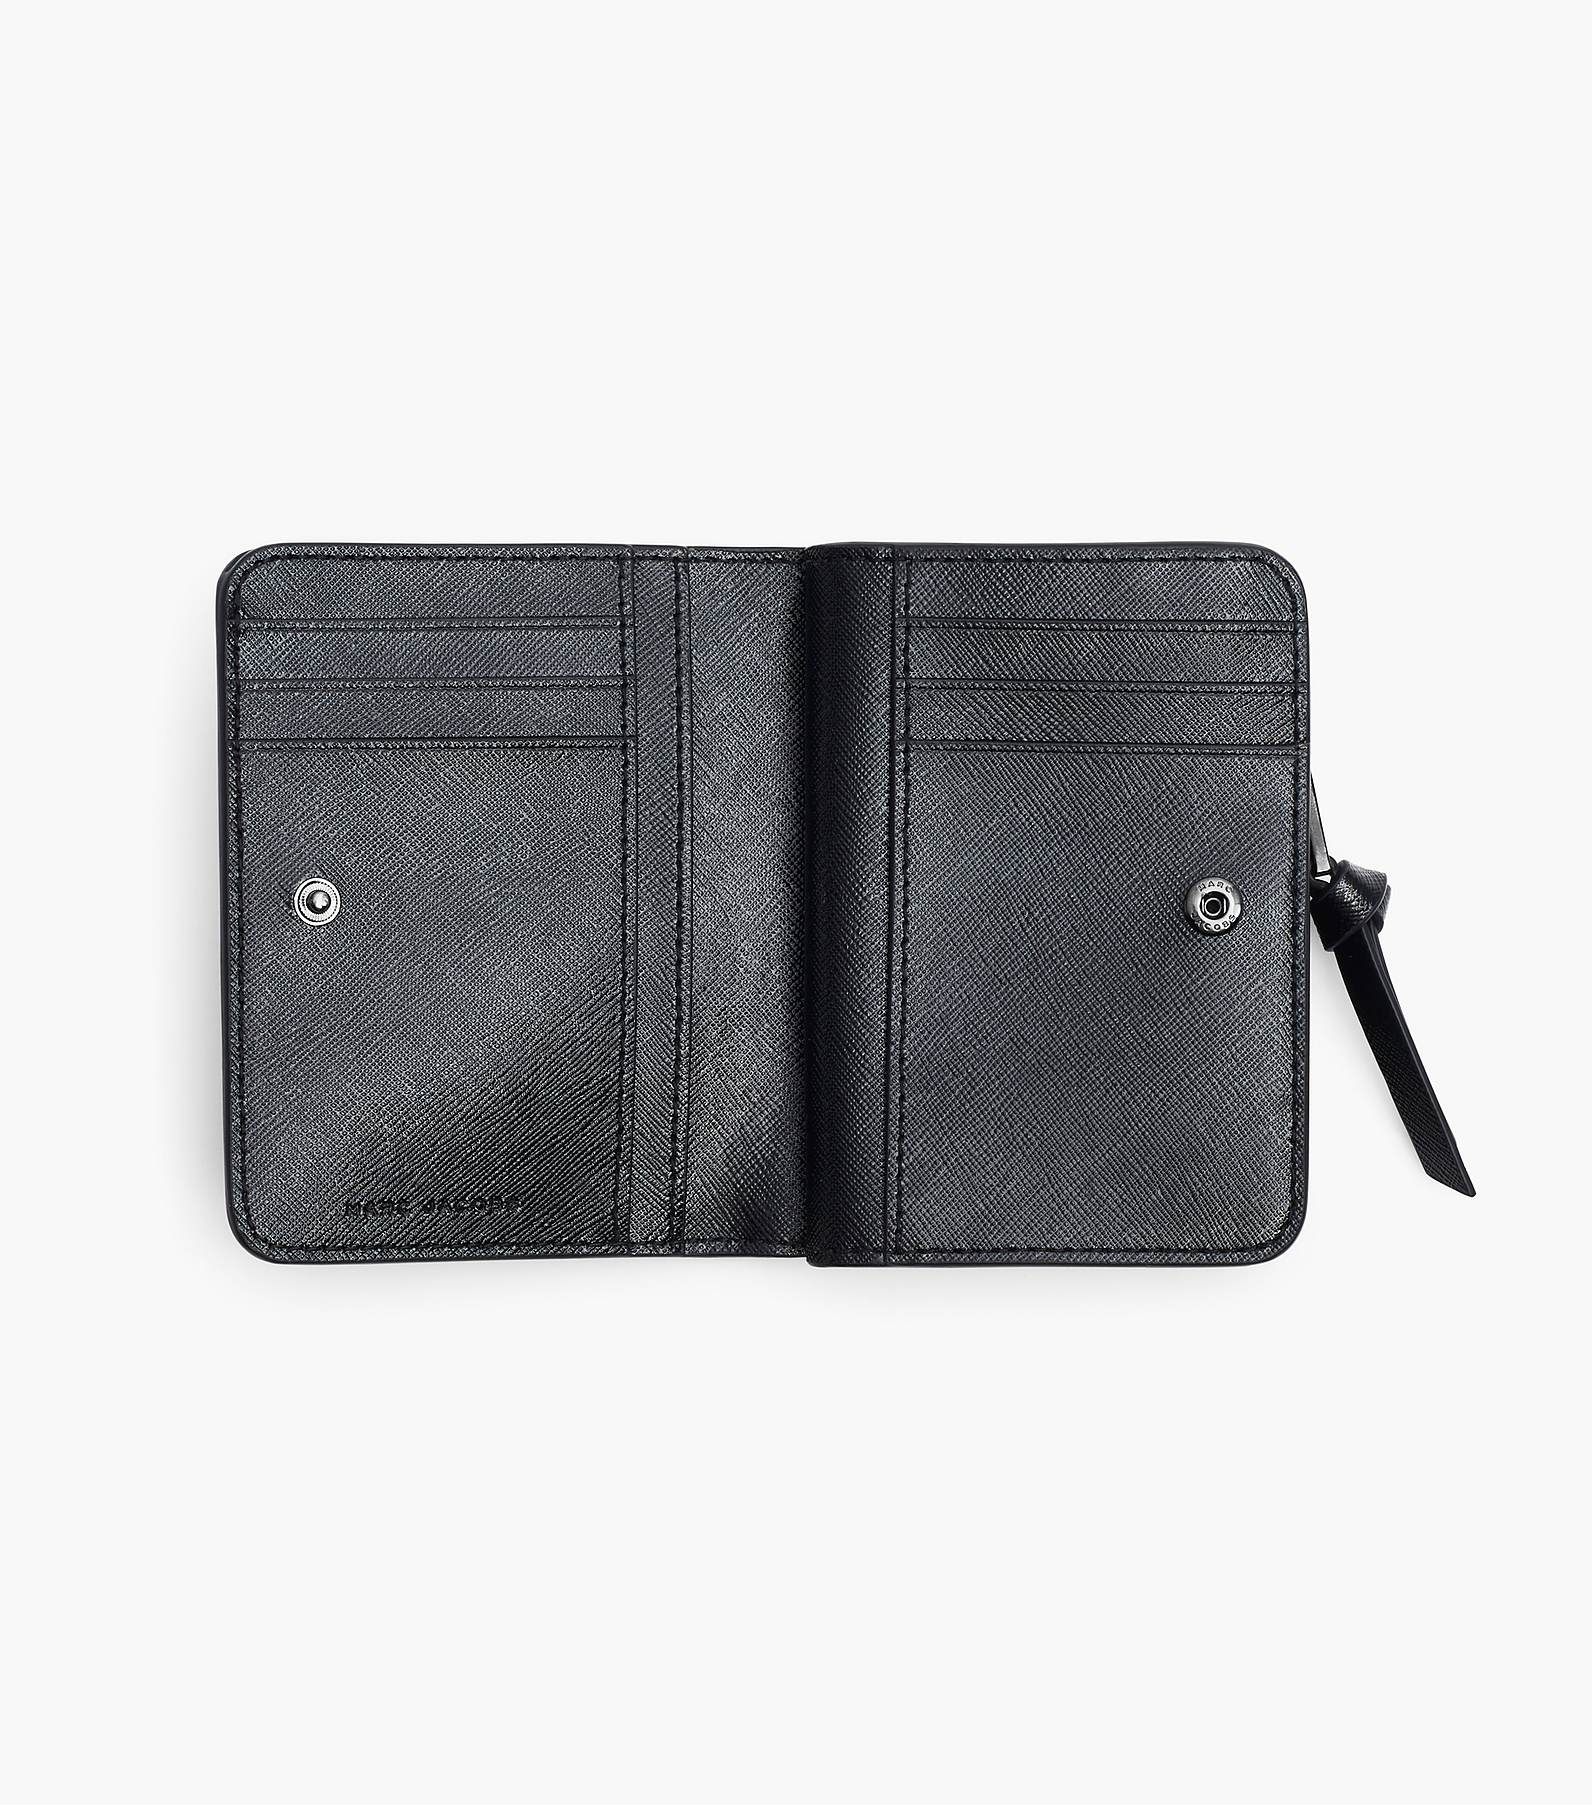 THE DTM UTILITY SNAPSHOT COMPACT WALLET MINI